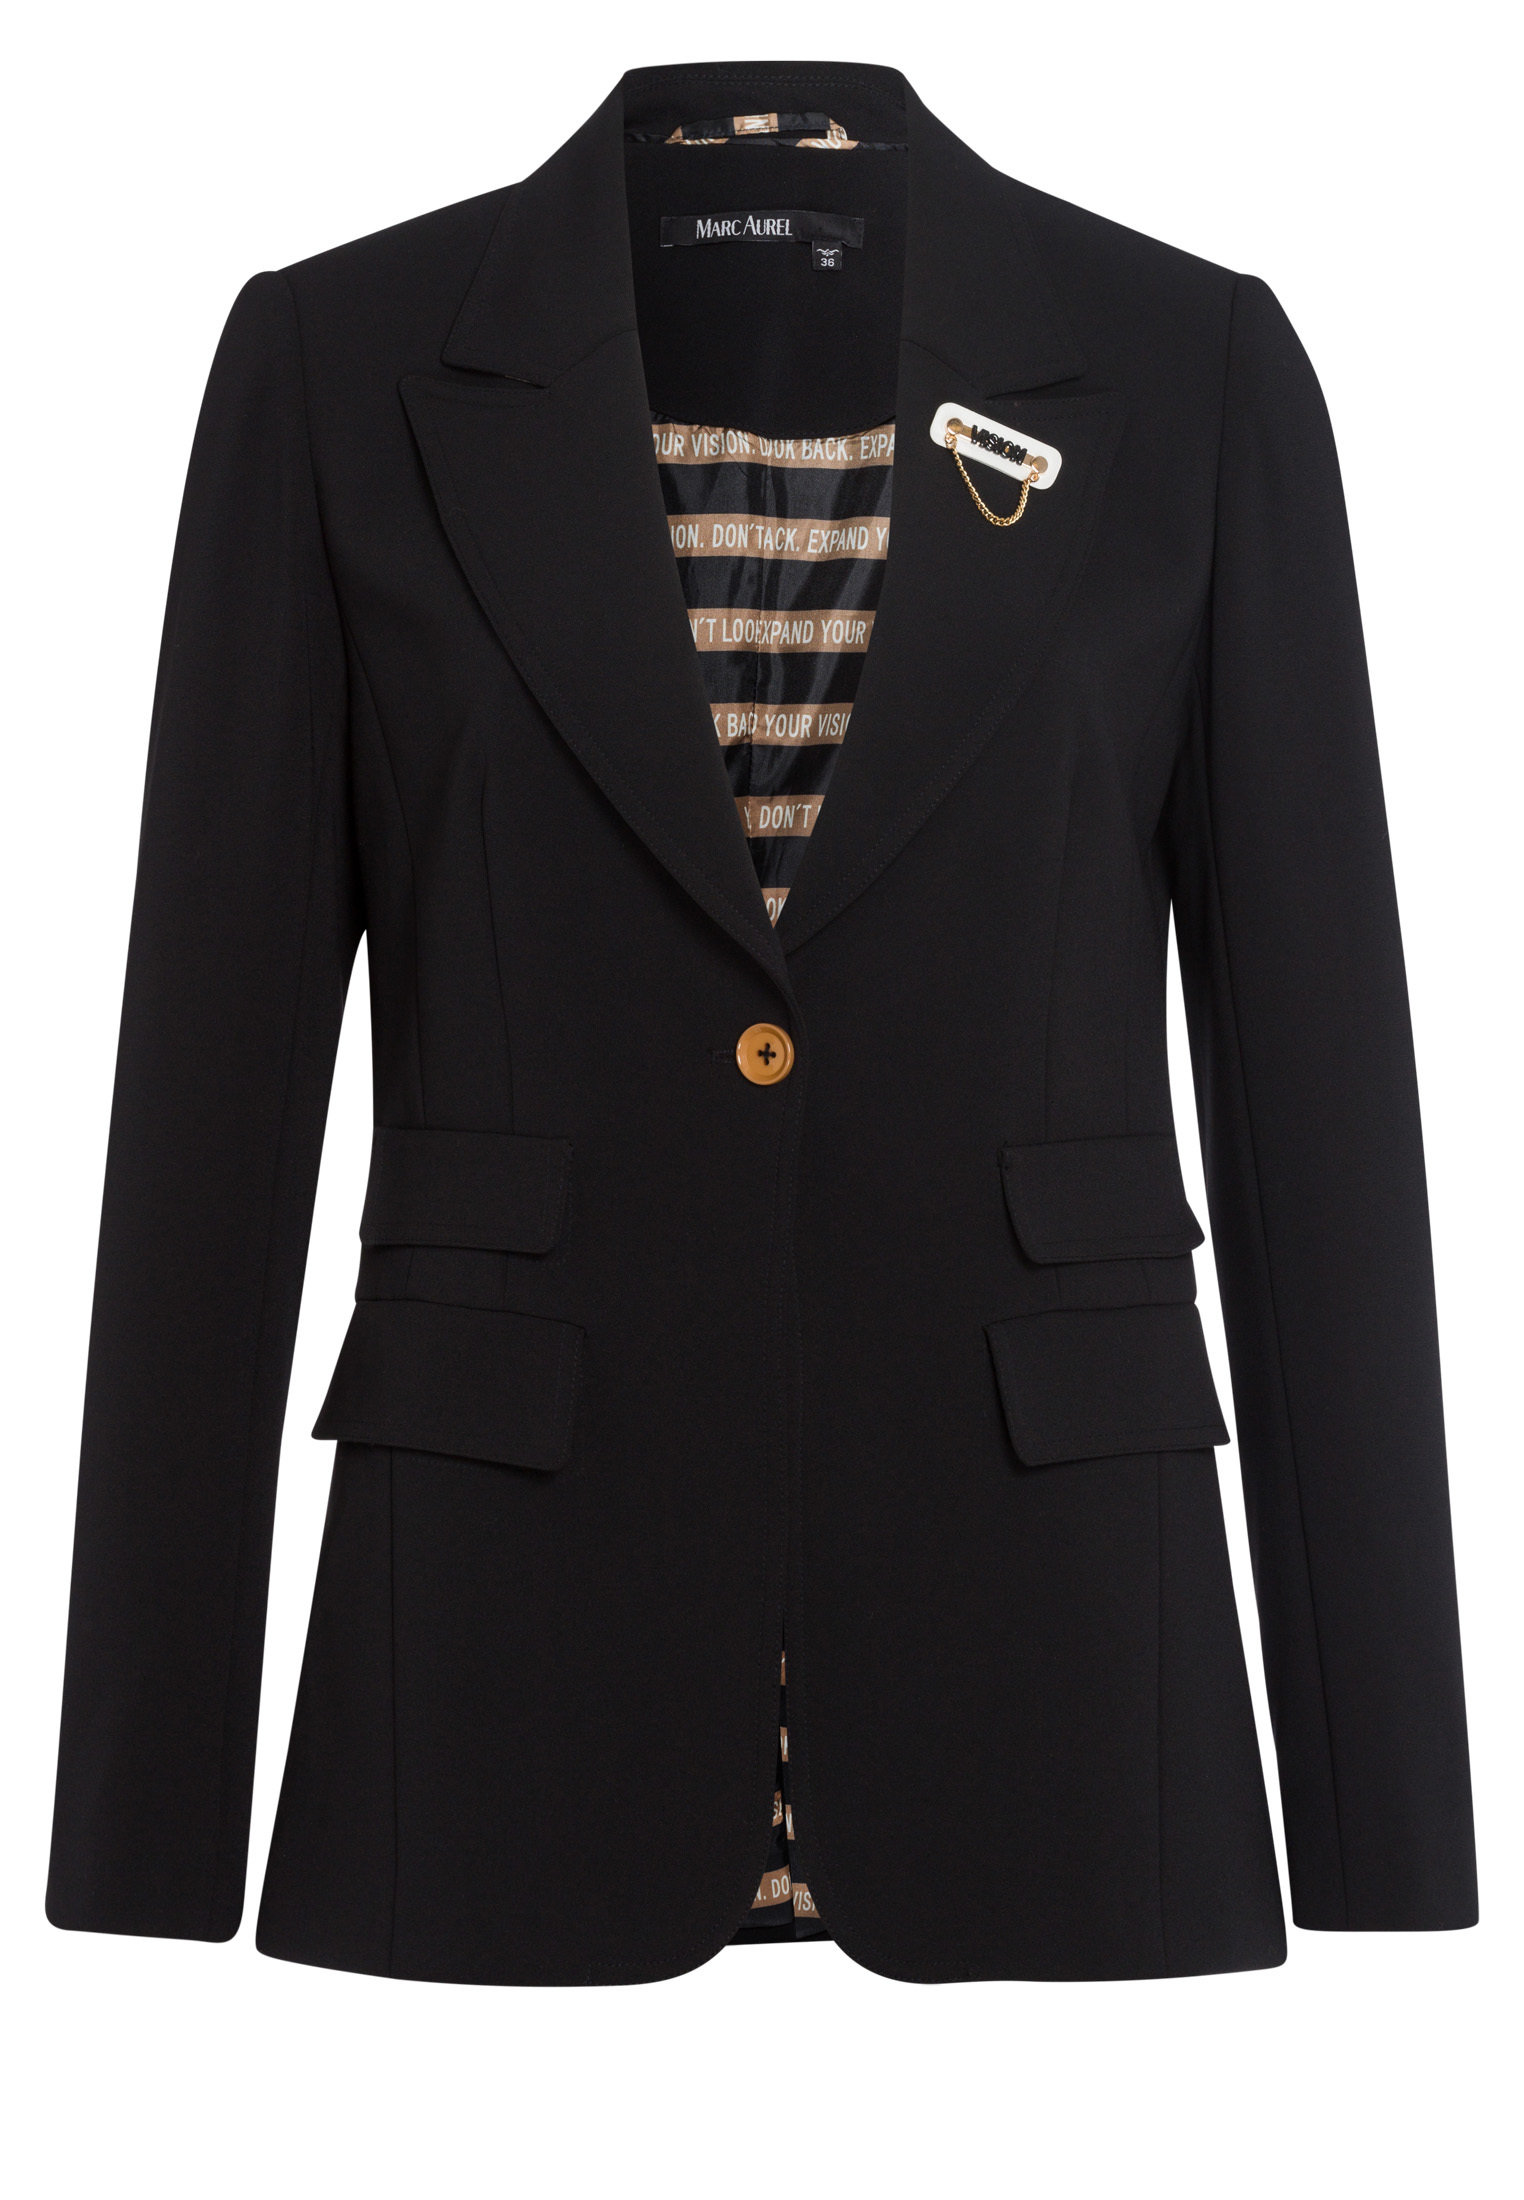 One-button blazer Of flowing crepe with brooch | Blazer & Jackets | Fashion